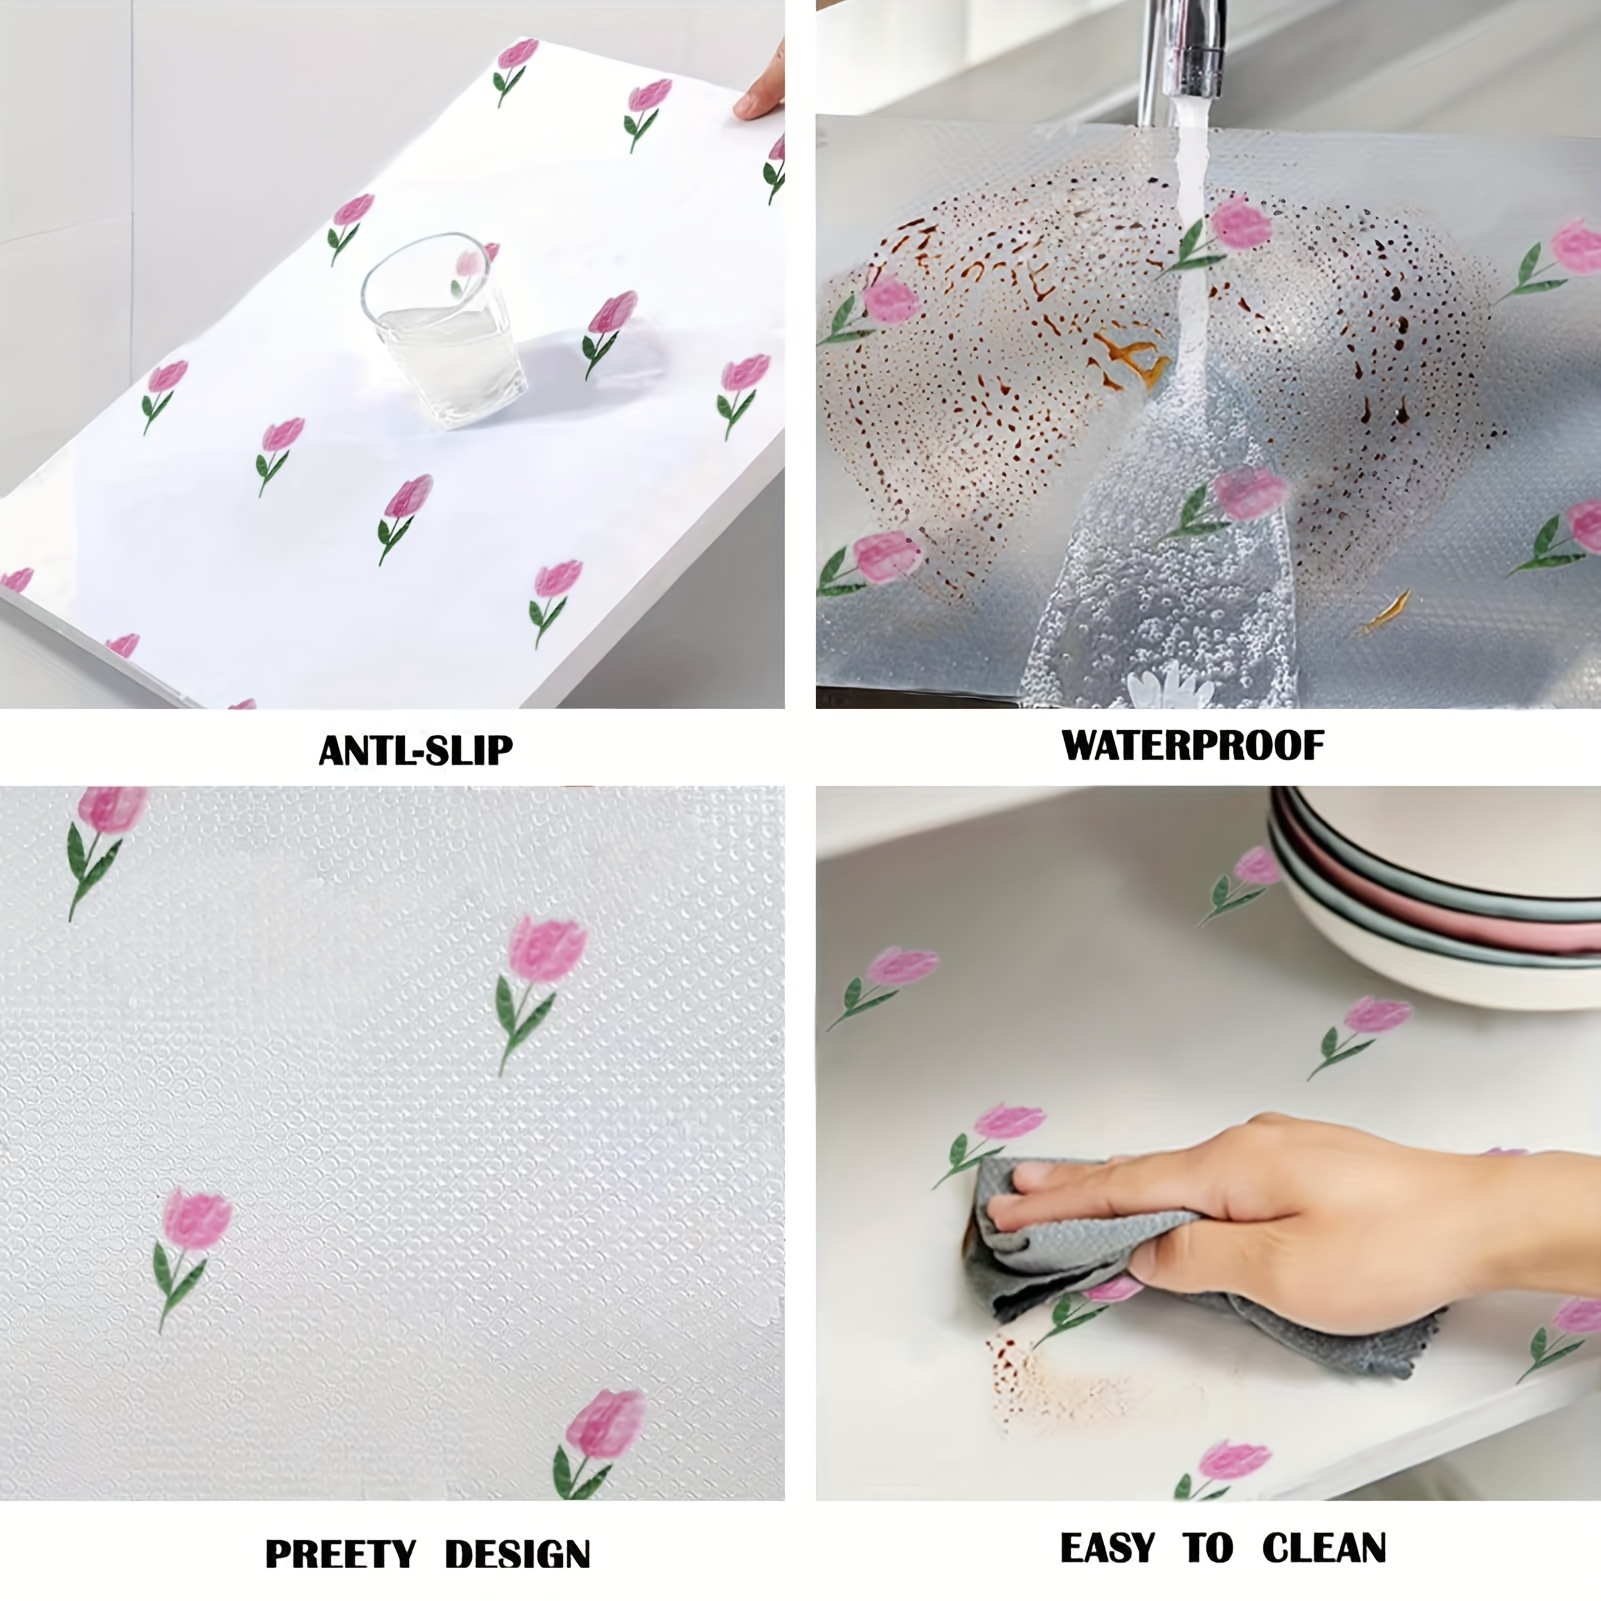 1pc Shelf Liners, Tulip Shelf Liner For Kitchen Cabinets, Non-Adhesive Drawer Liner, Non-Slip Refrigerator Liner, Waterproof Fridge Pad, Cupboard Mat, Easy Placemats, 44.96cmX 149.86cm, Kitchen Supplies